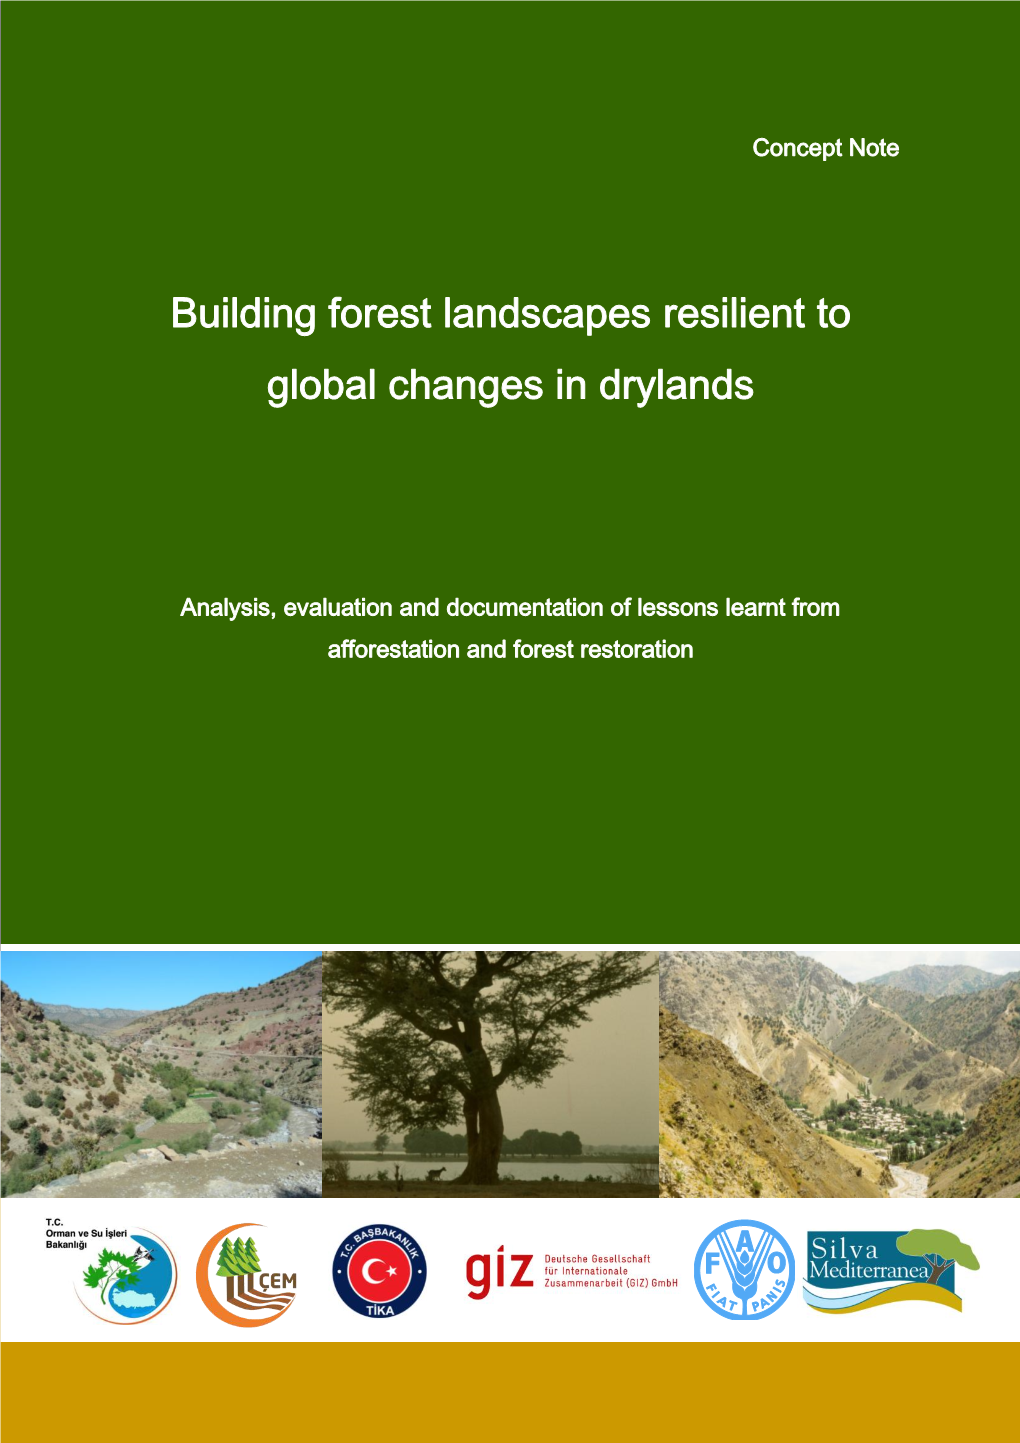 Building Forest Landscapes Resilient to Global Changes in Drylands